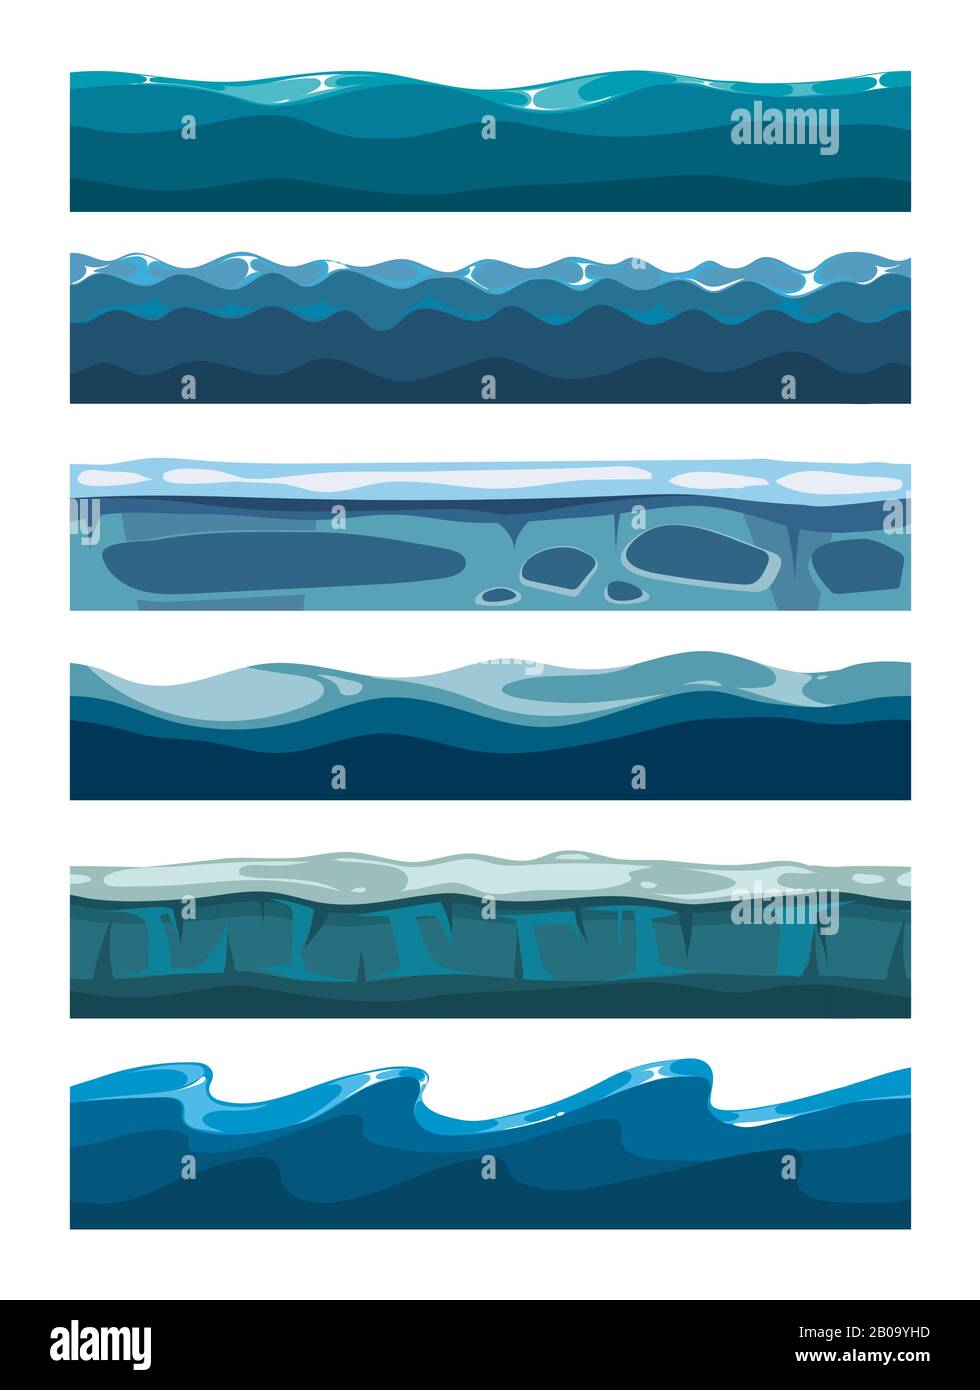 Set of sea backgrounds for mobile games apps. Collection of water surface illustration Stock Vector